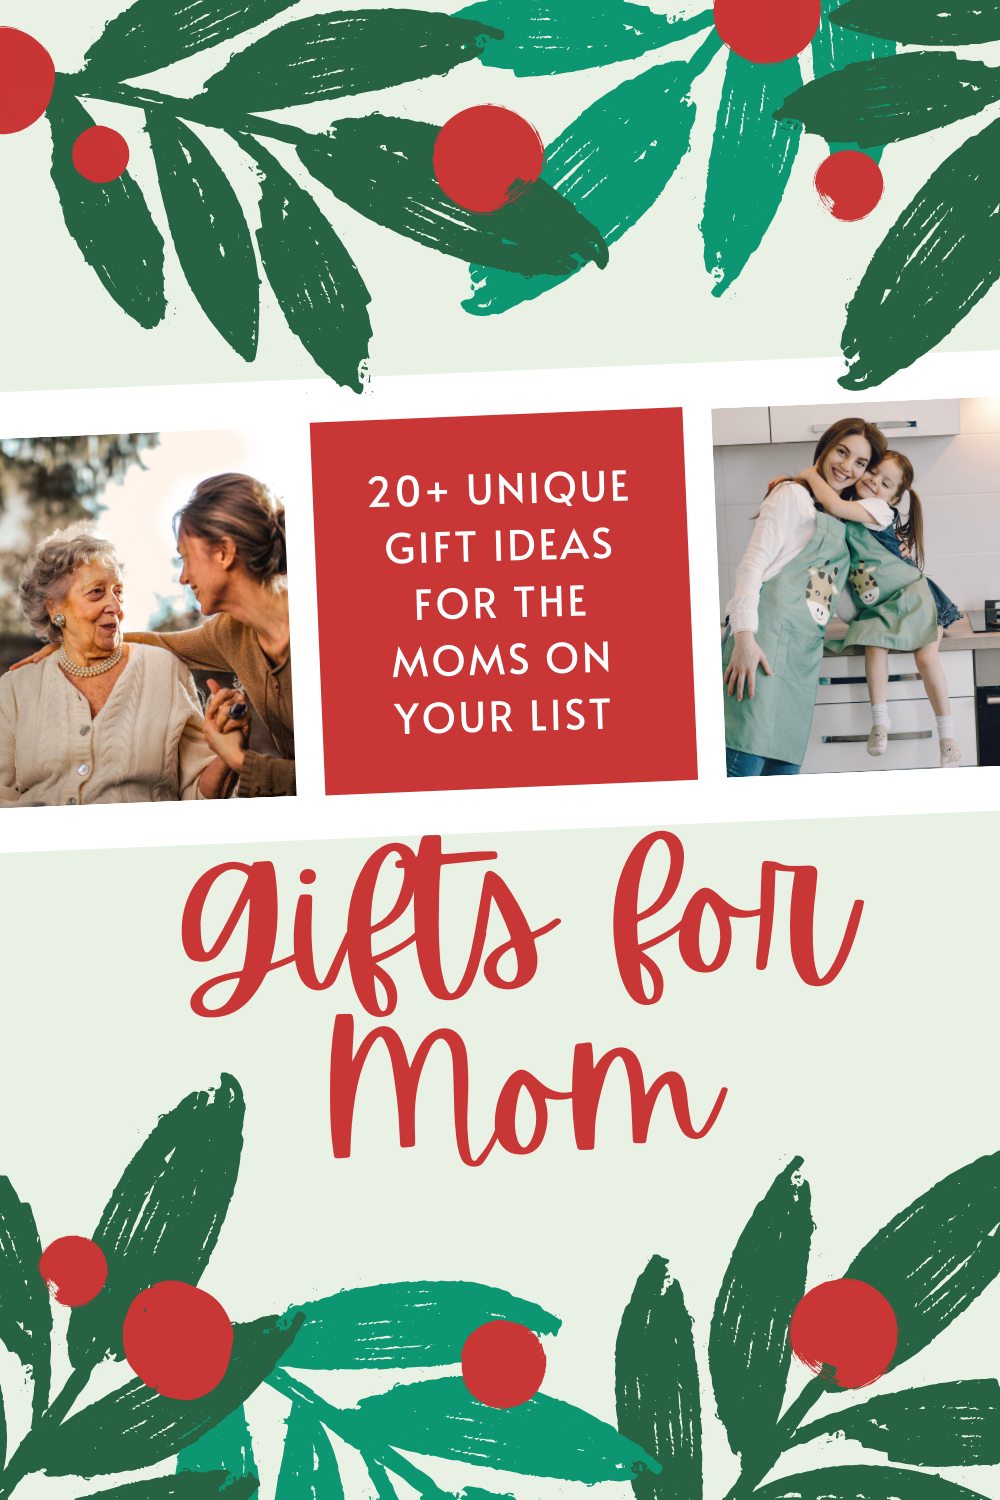 20+ Unique Gift Ideas Mom is Sure to Love | Find the perfect Christmas gift for your mom, grandmother, or wife with this list of unique gift ideas! Some are meaningful, fun, useful, or edible. Also includes the best subscription box ideas. Even if your mom has everything, you'll find the present that is just right! #christmasgifts #giftideas #giftideasforher #giftideasformom #uniquegifts #fungiftideas #thoughtfulgifts #christmas2020 #bestgiftideas